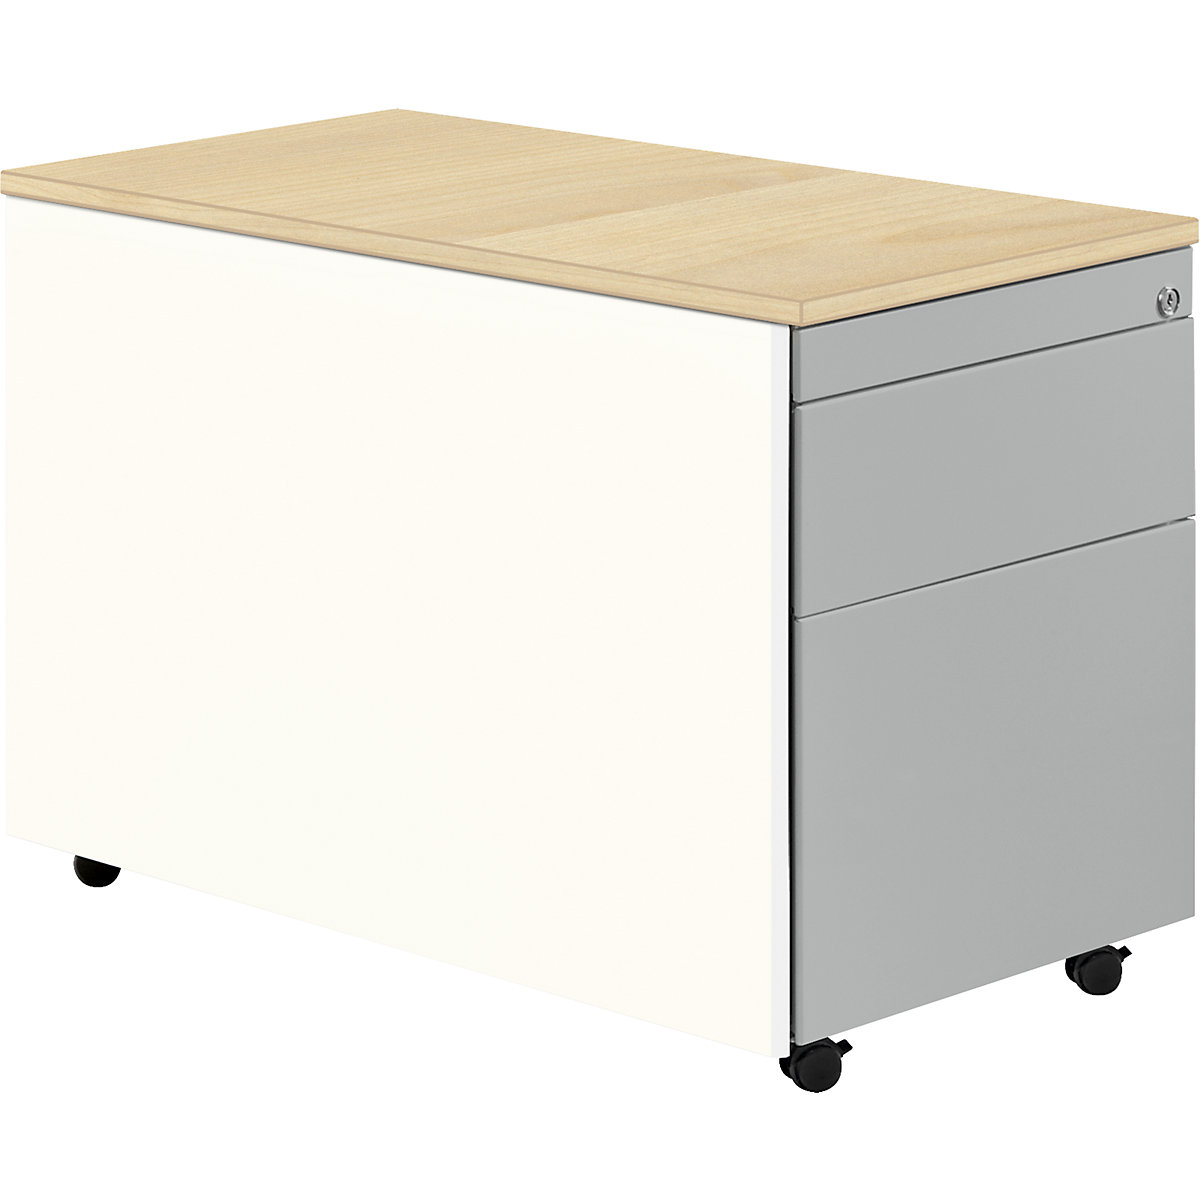 Drawer pedestal with castors – mauser, HxD 579 x 800 mm, plastic panel, 1 drawer, 1 suspension file drawer, pure white / white aluminium / maple-3